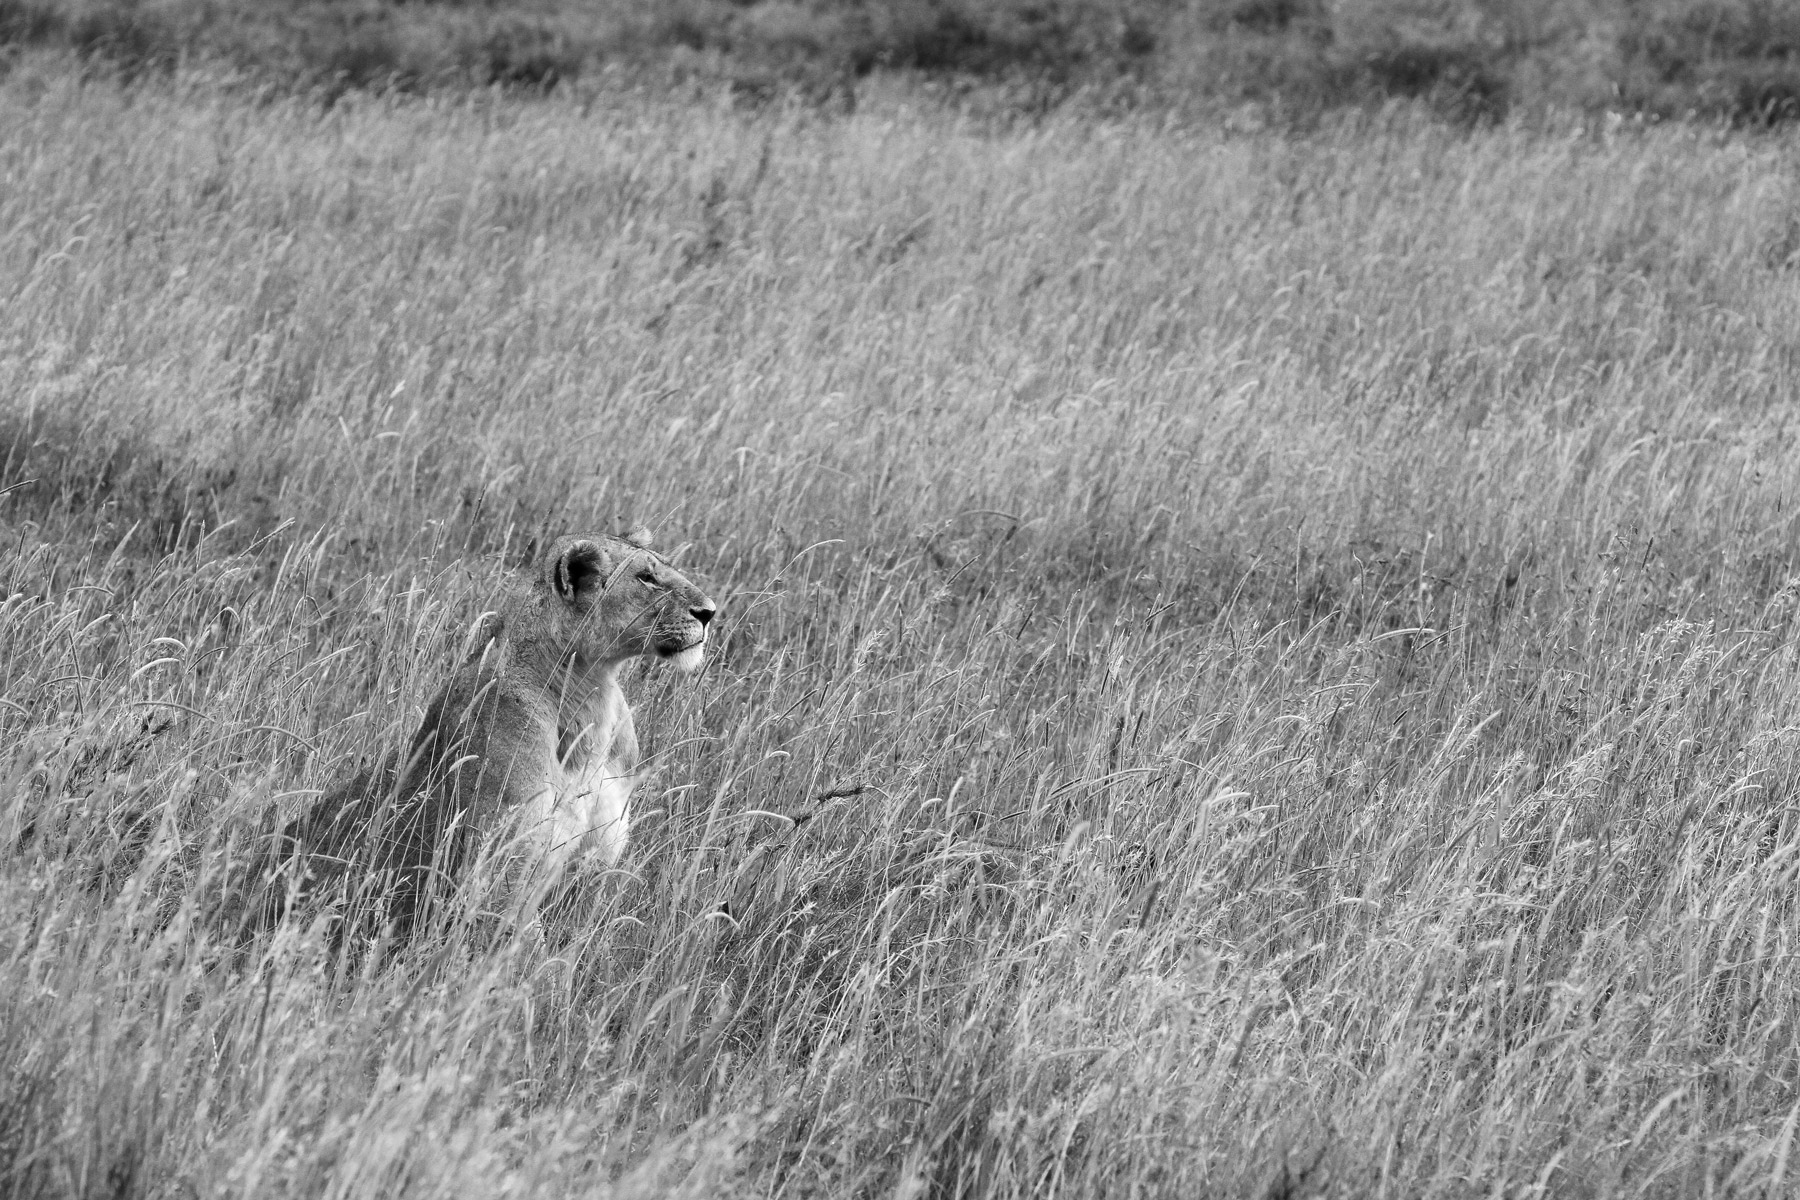 A lioness sitting in tall grass in Serengeti National Park, Tanzania